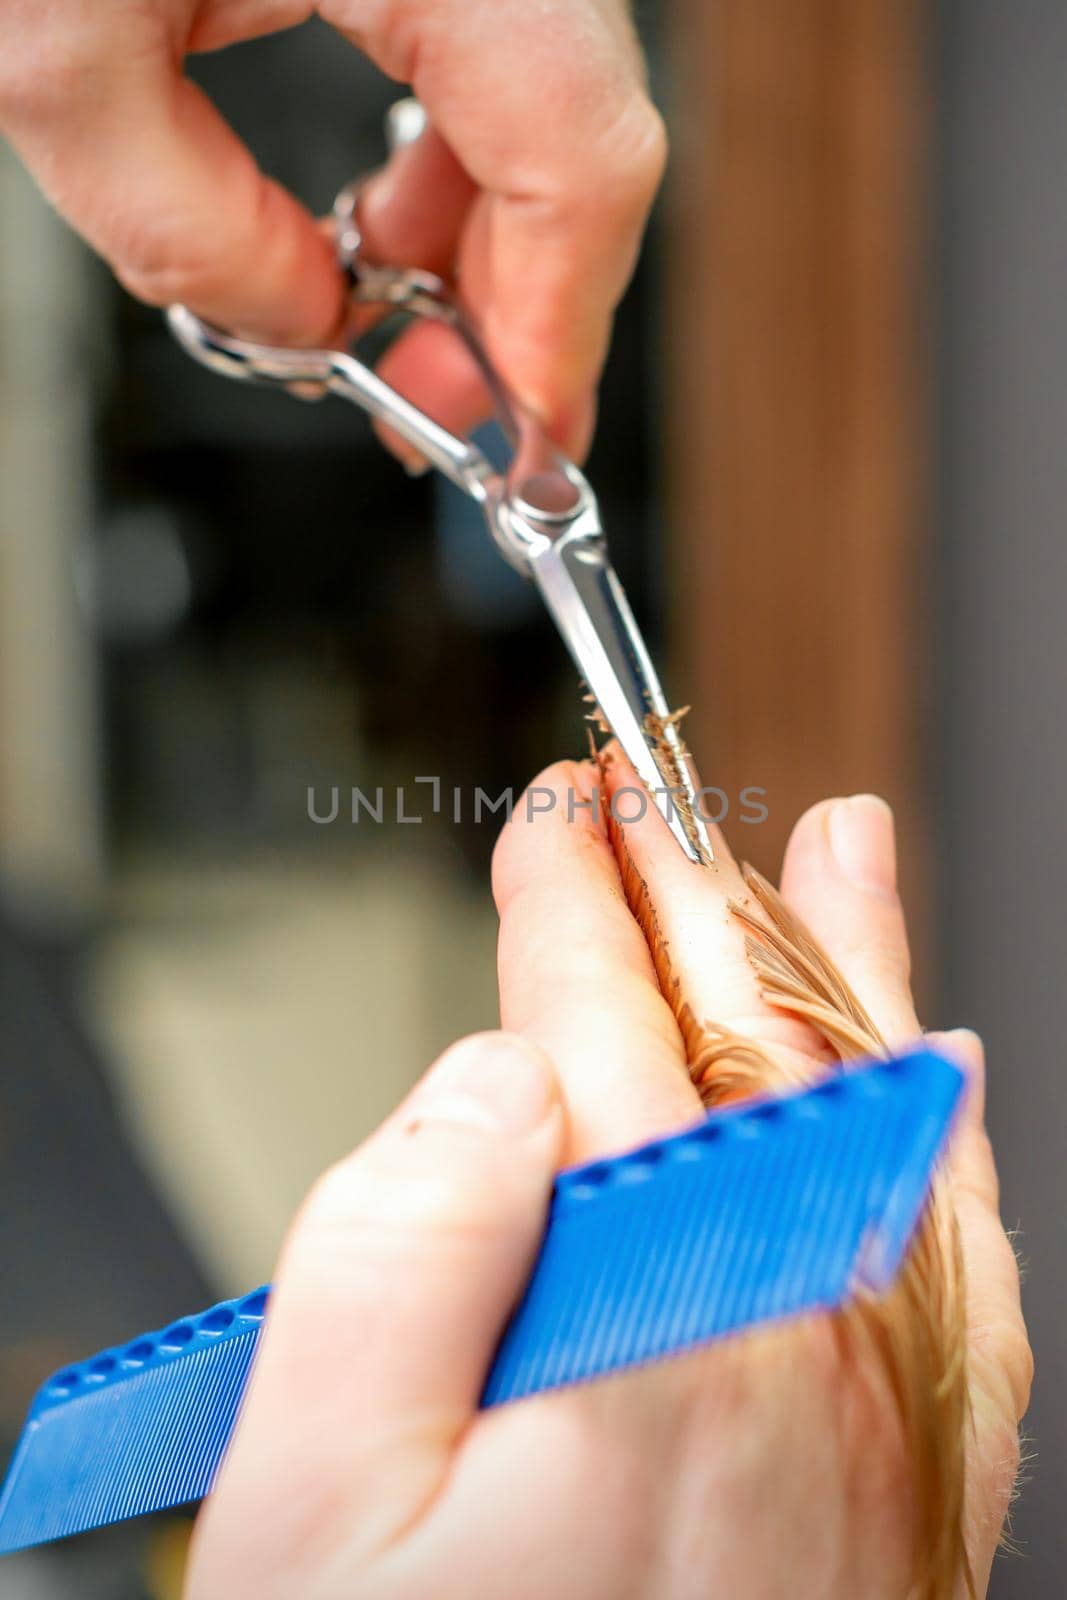 Haircut of red hair tips with comb and scissors by hands of a male hairdresser in a hair salon, close up. by okskukuruza